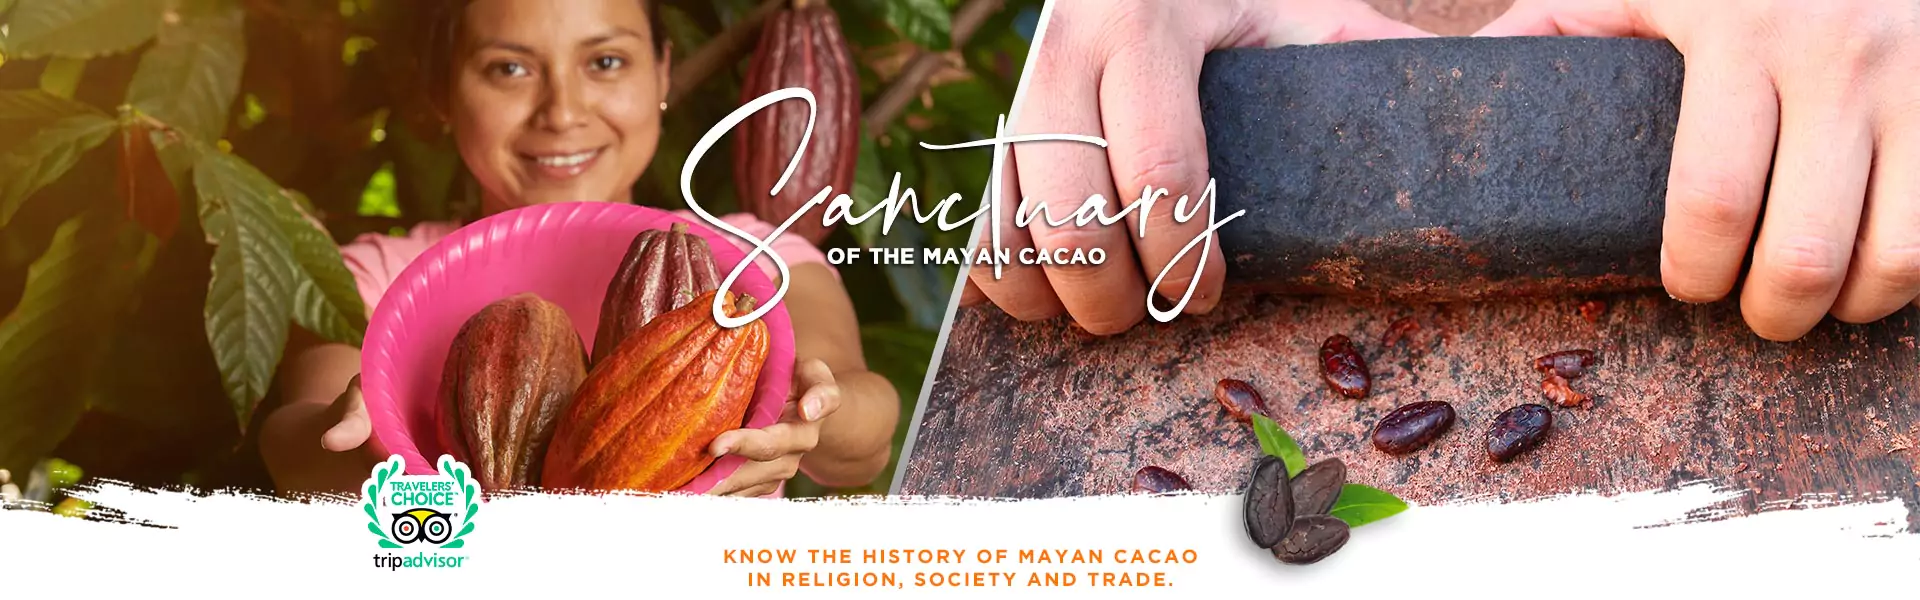 Entrance to Sanctuary of cacao and mayan honey